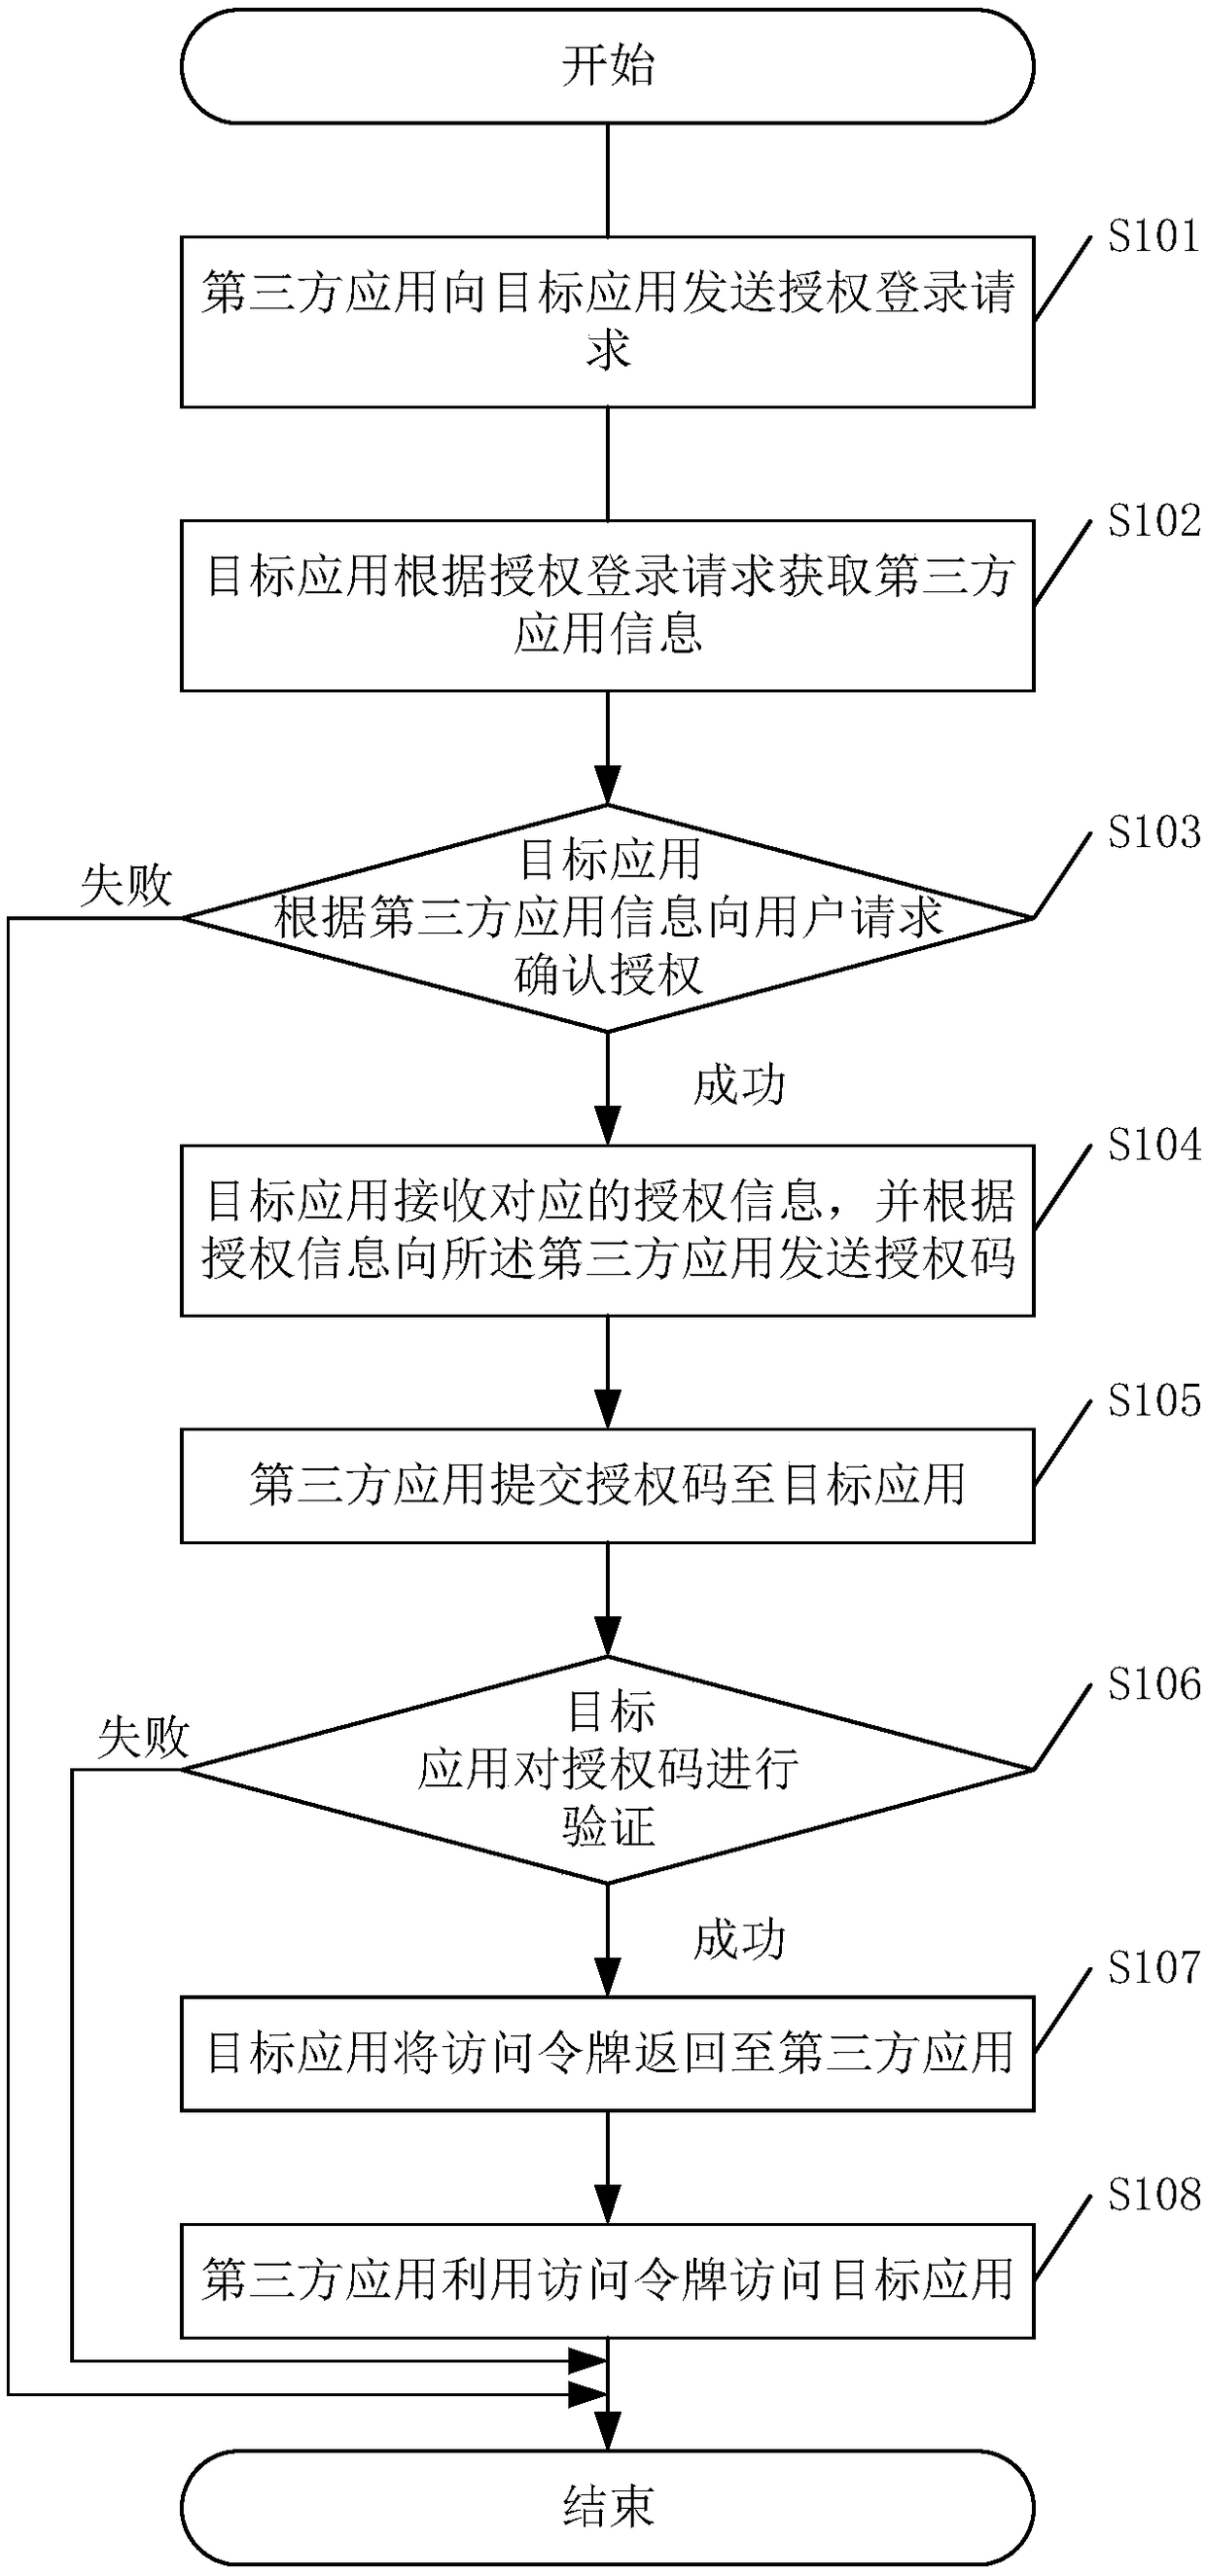 Method and system for accessing application data